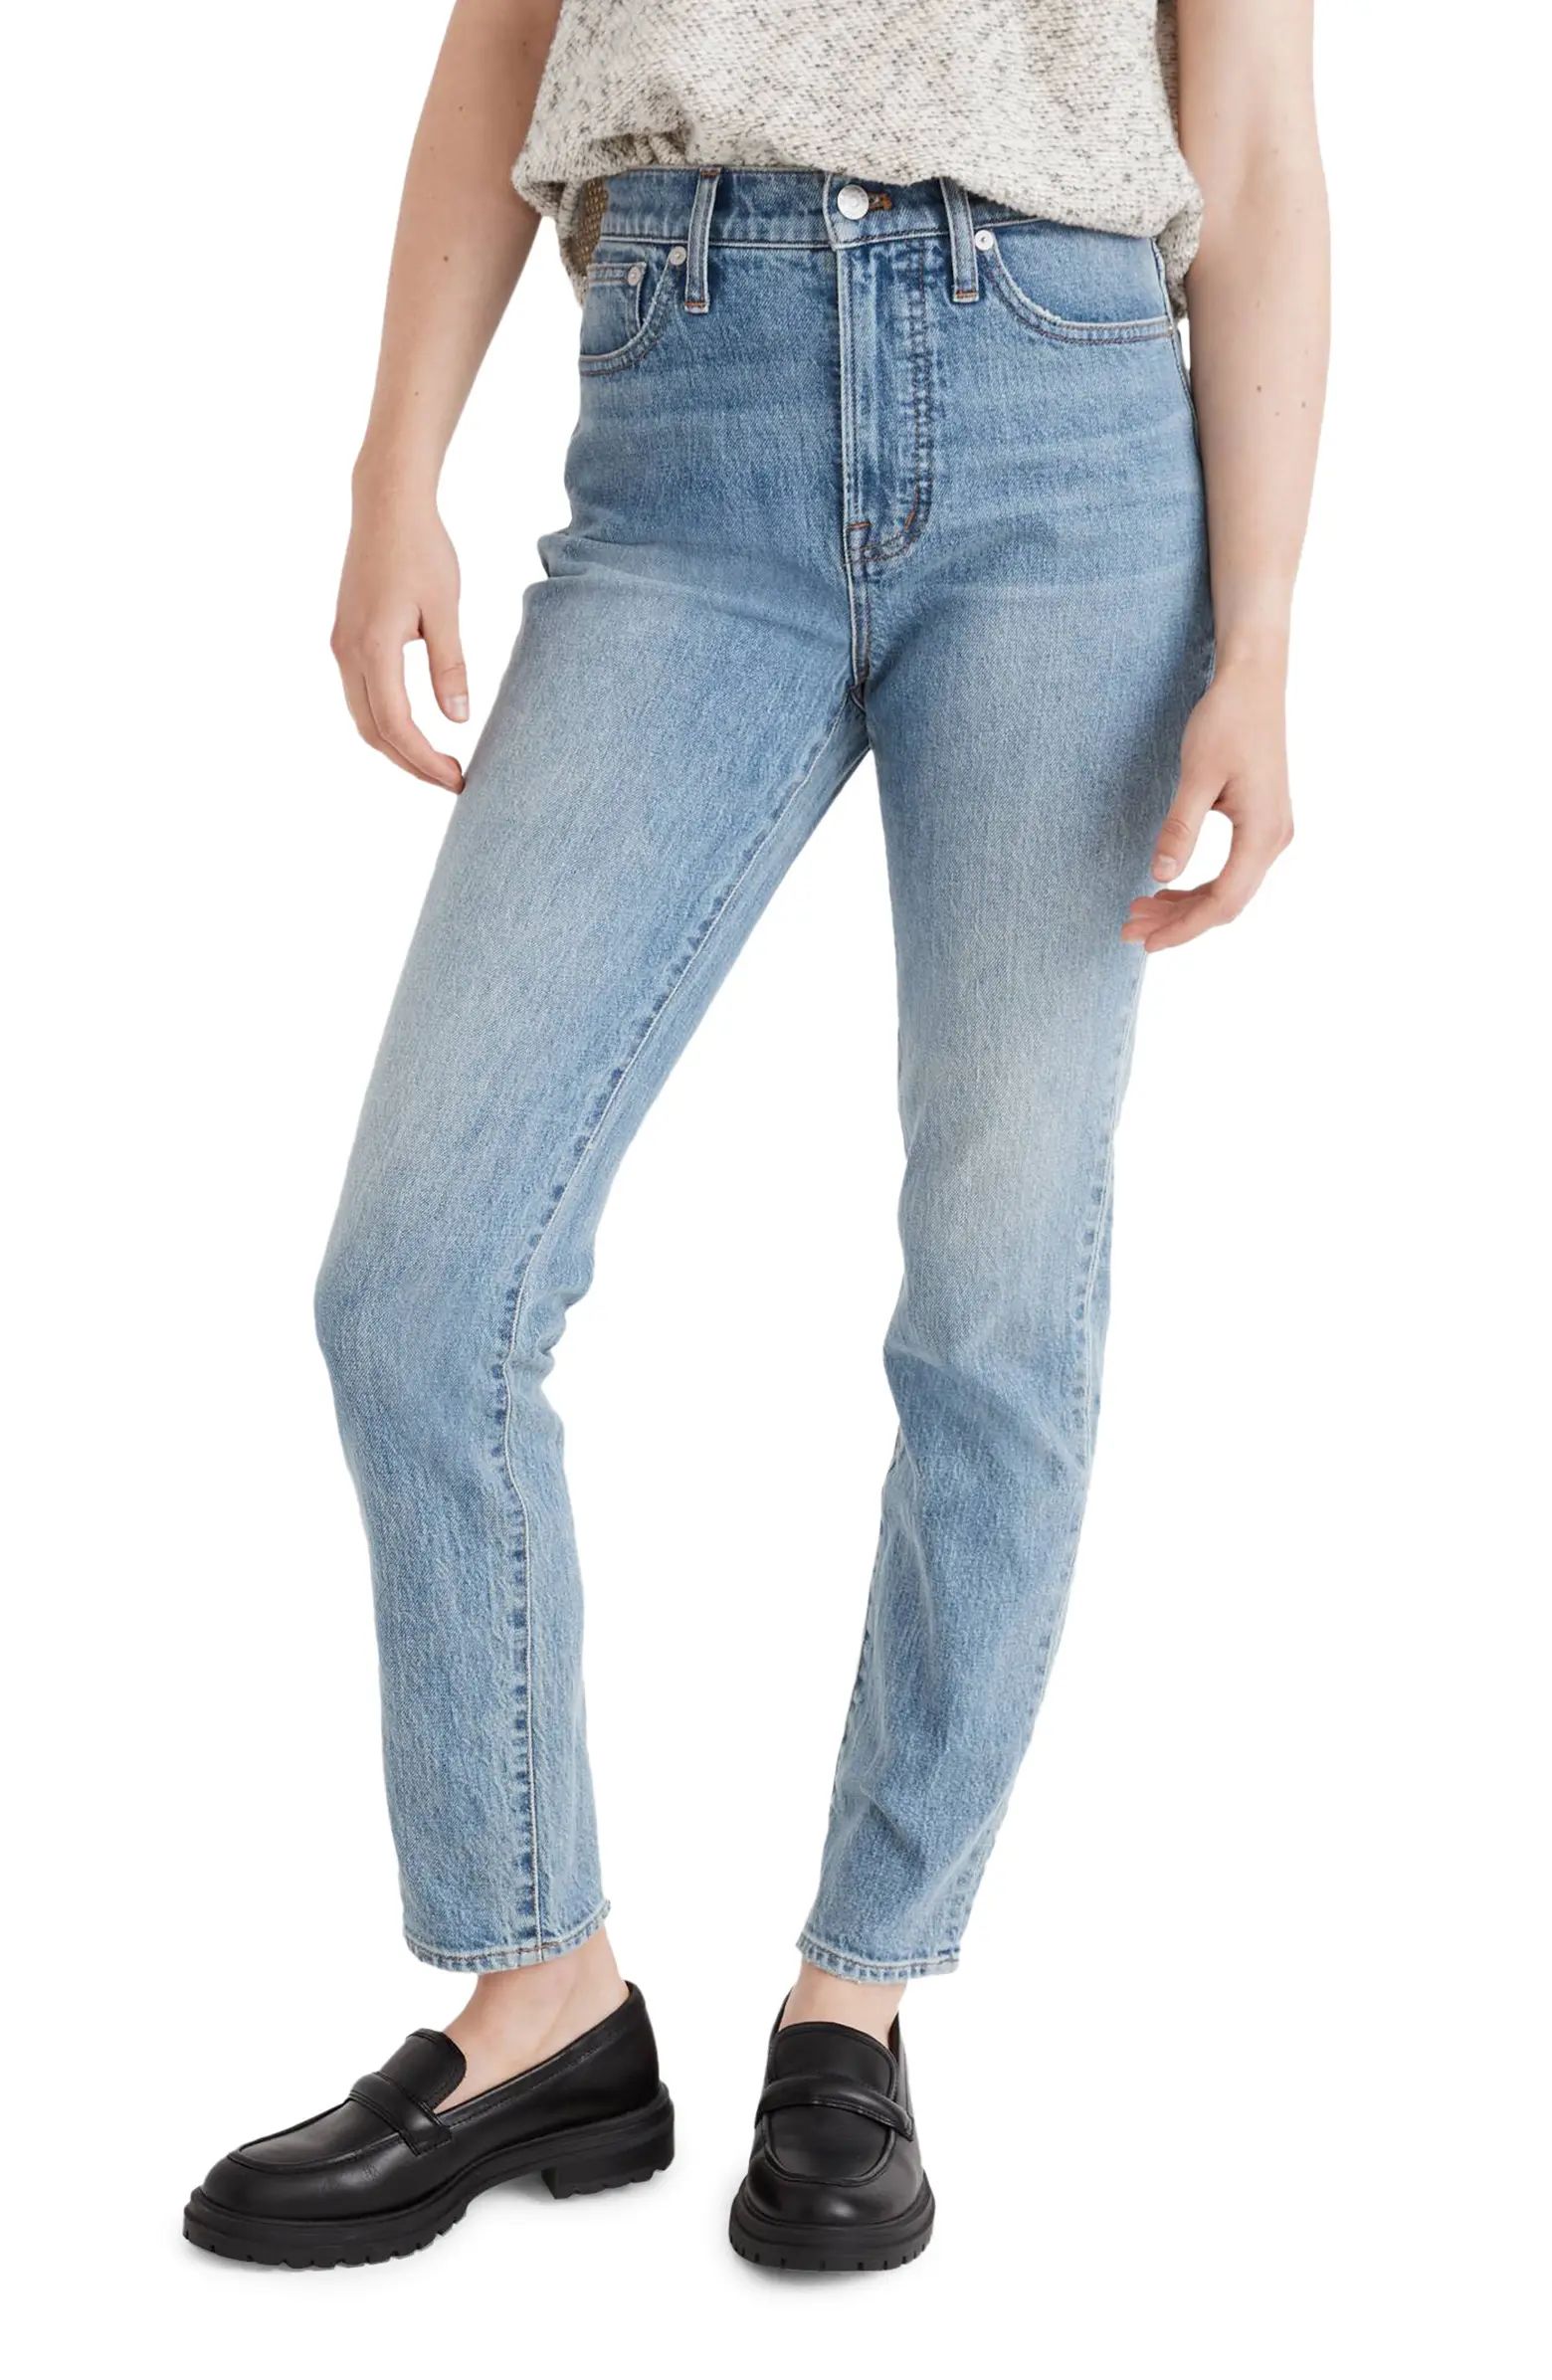 The Perfect Vintage Jean | Nordstrom